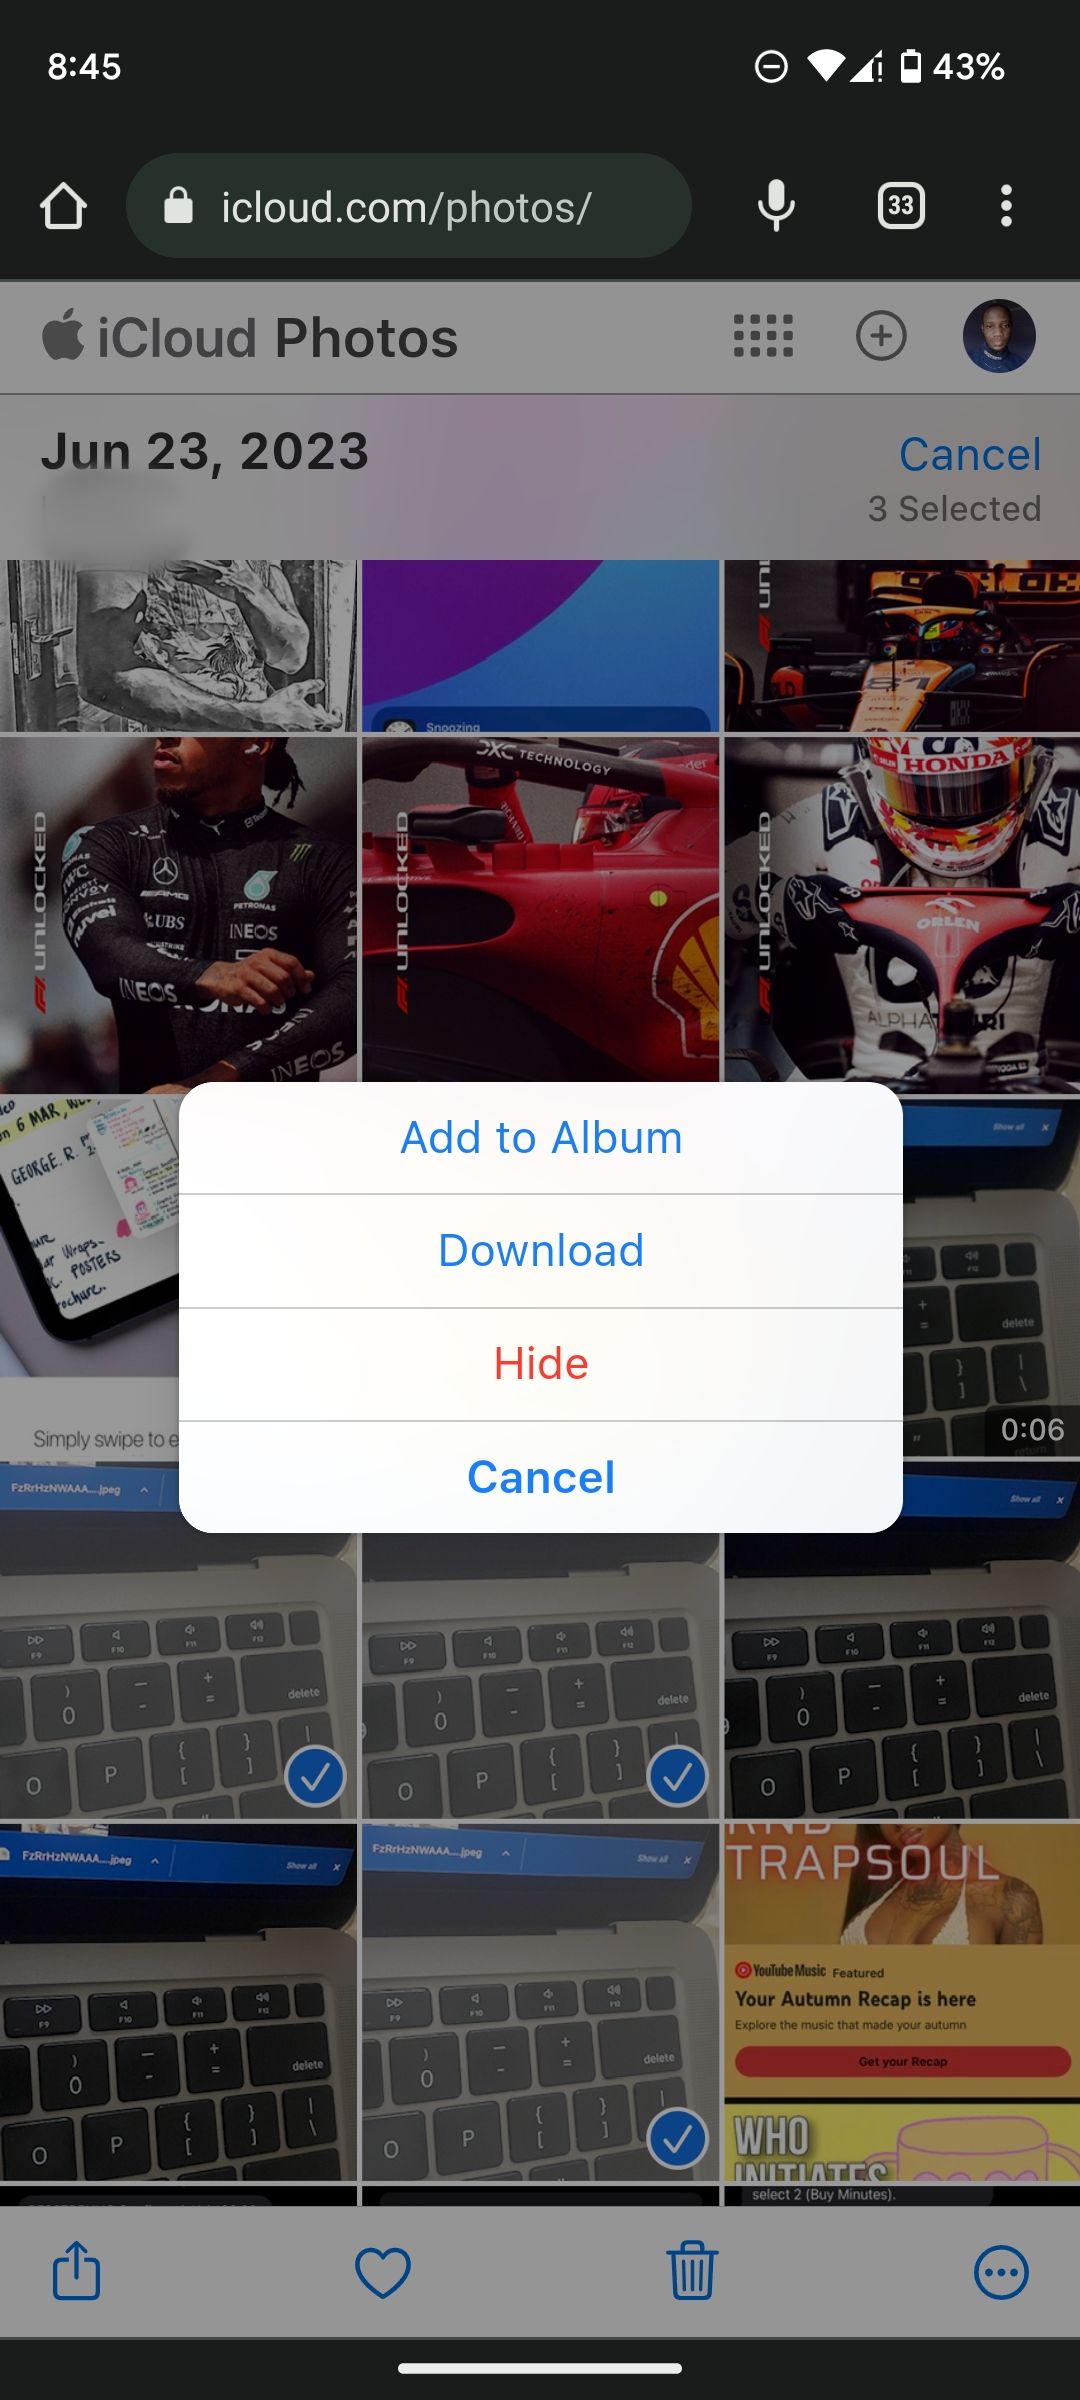 Download images in iCloud Photos